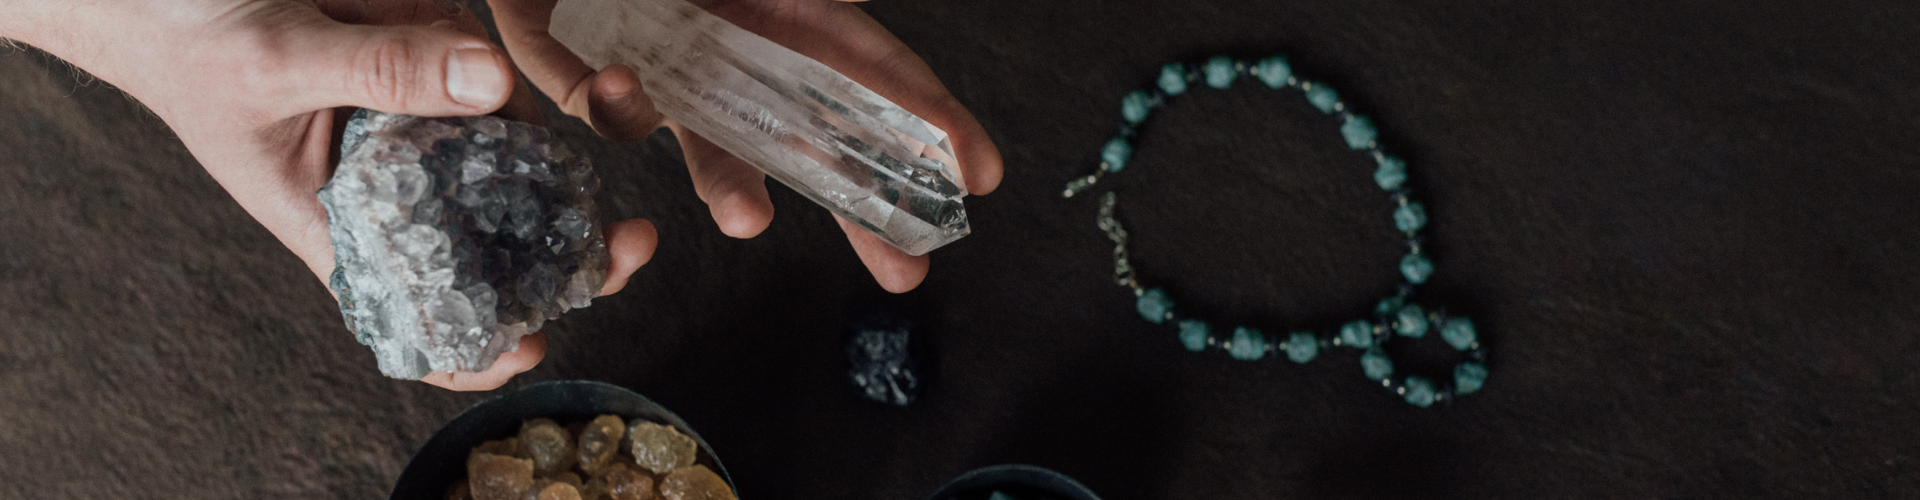 A Person Holding Healing Crystals